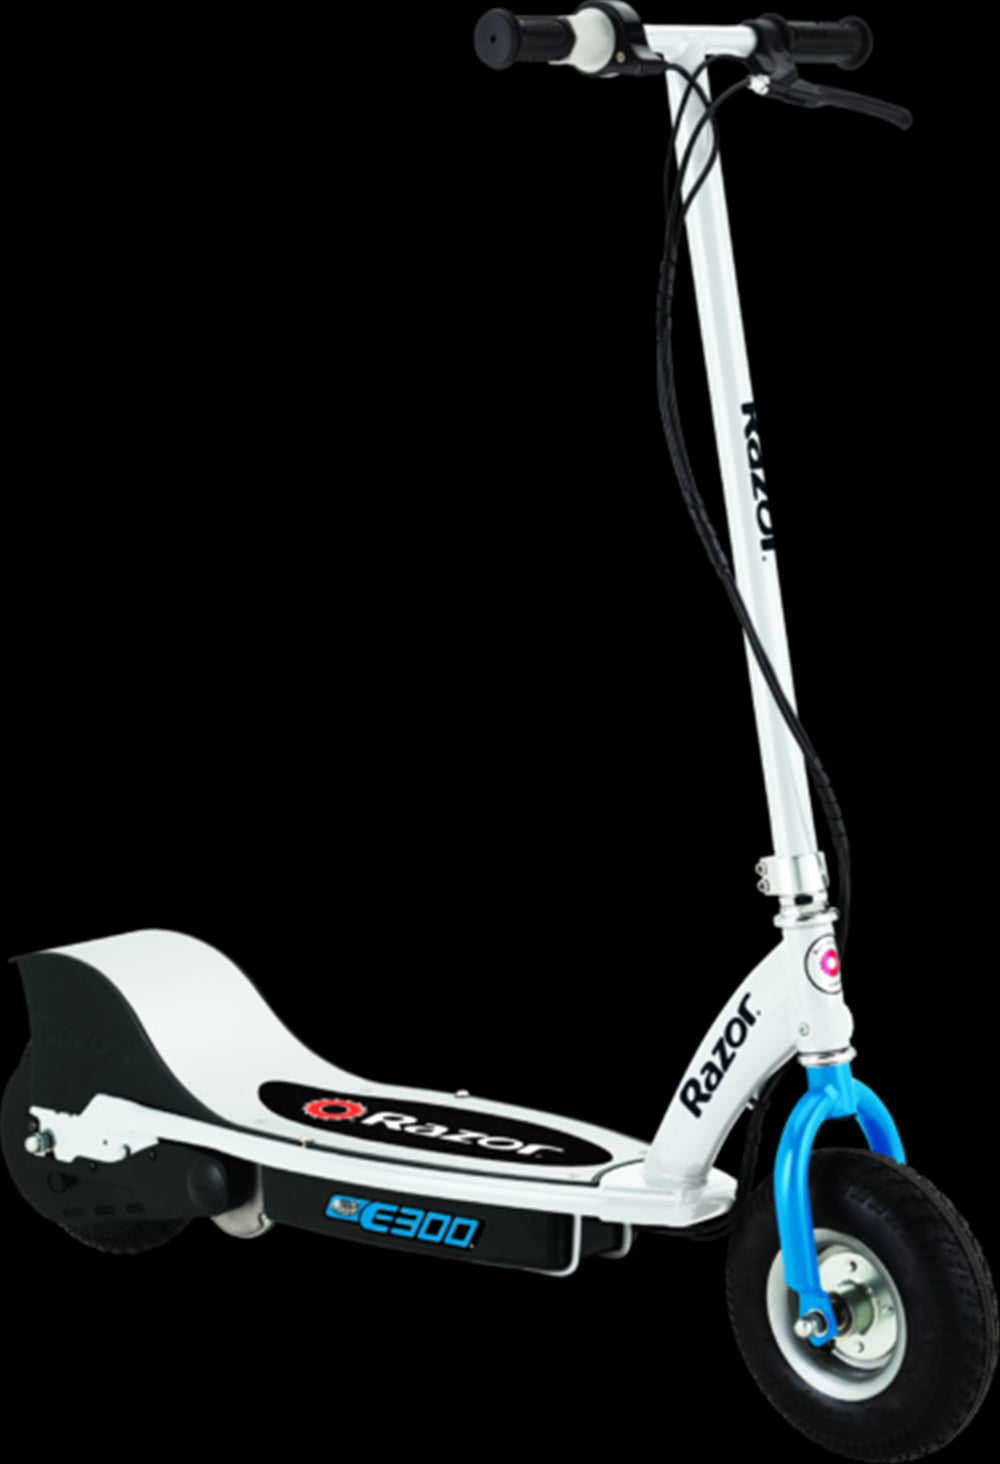 E300 Electric Scooter

